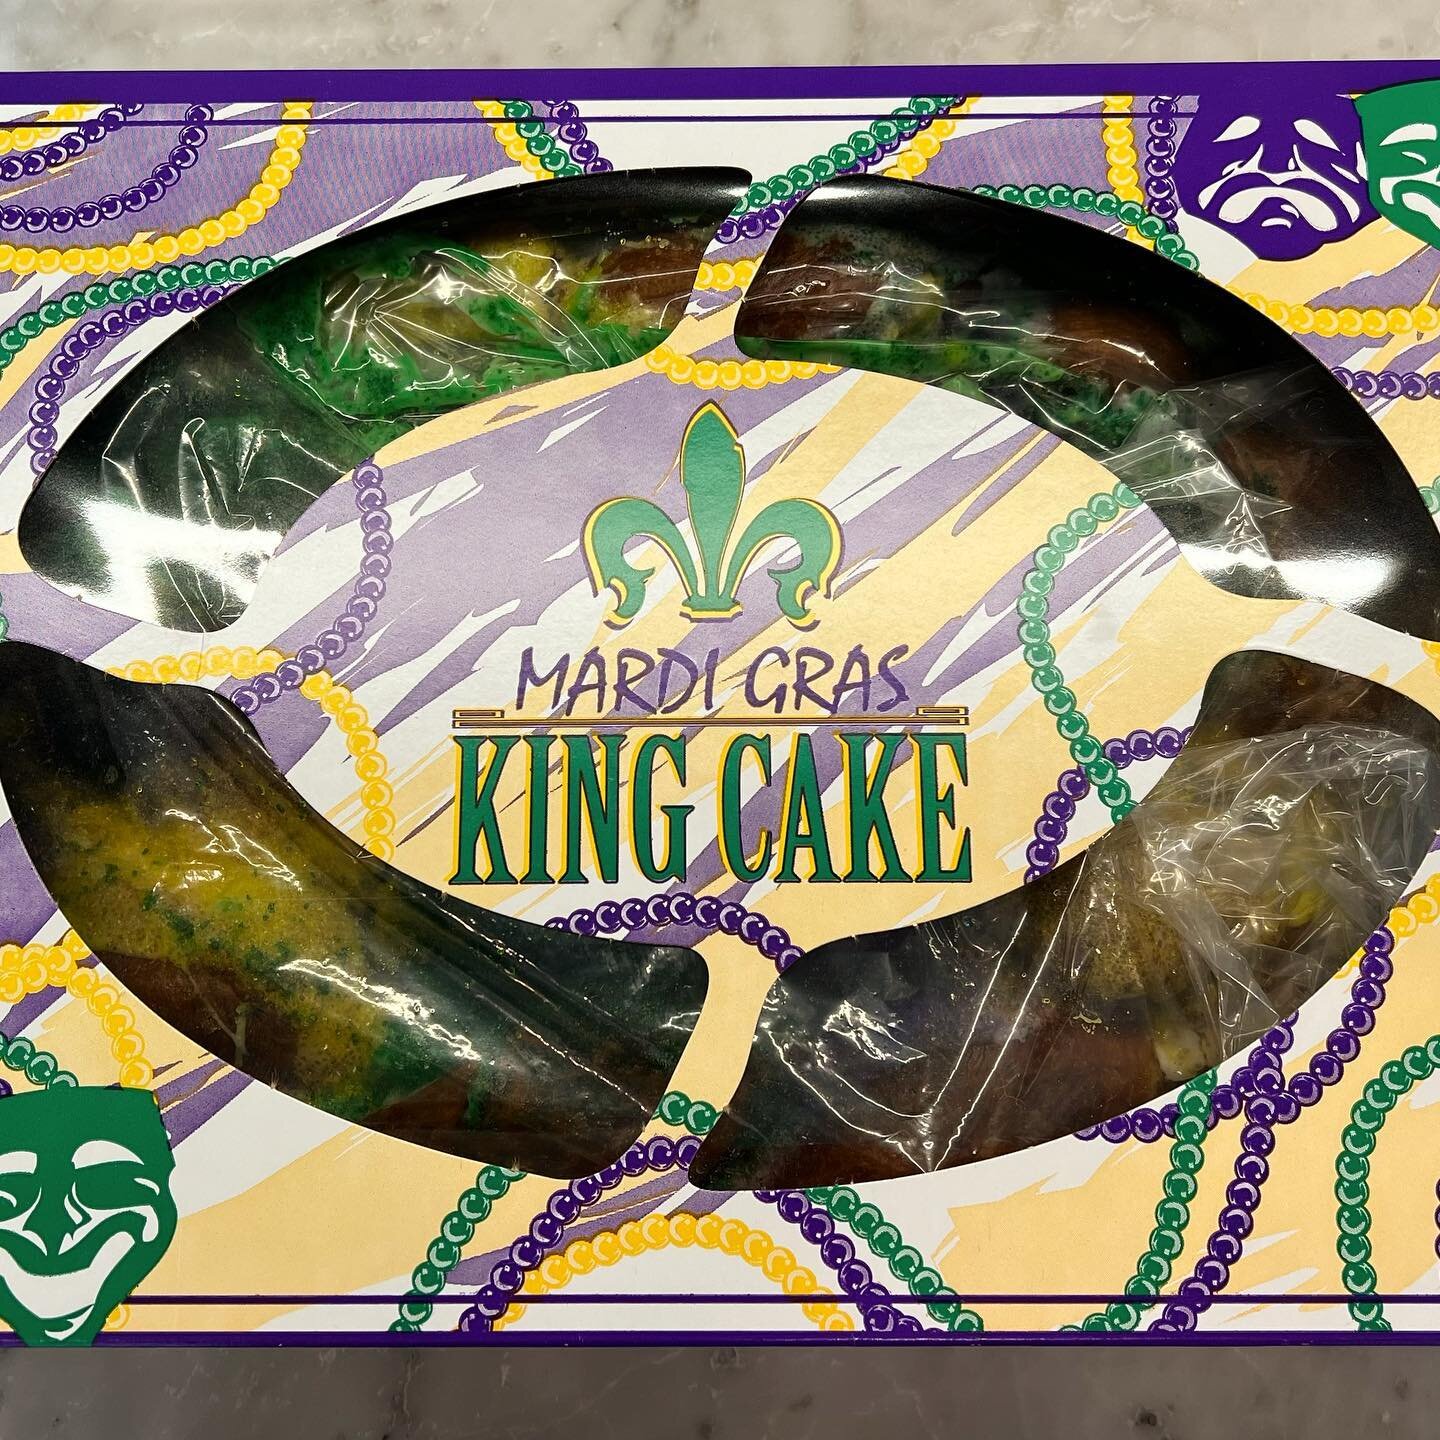 Its getting serious in here. Thank you Dr. Laura Wood!!! #laissezlesbontempsrouler #mardigras #kingcake #sugaroverload